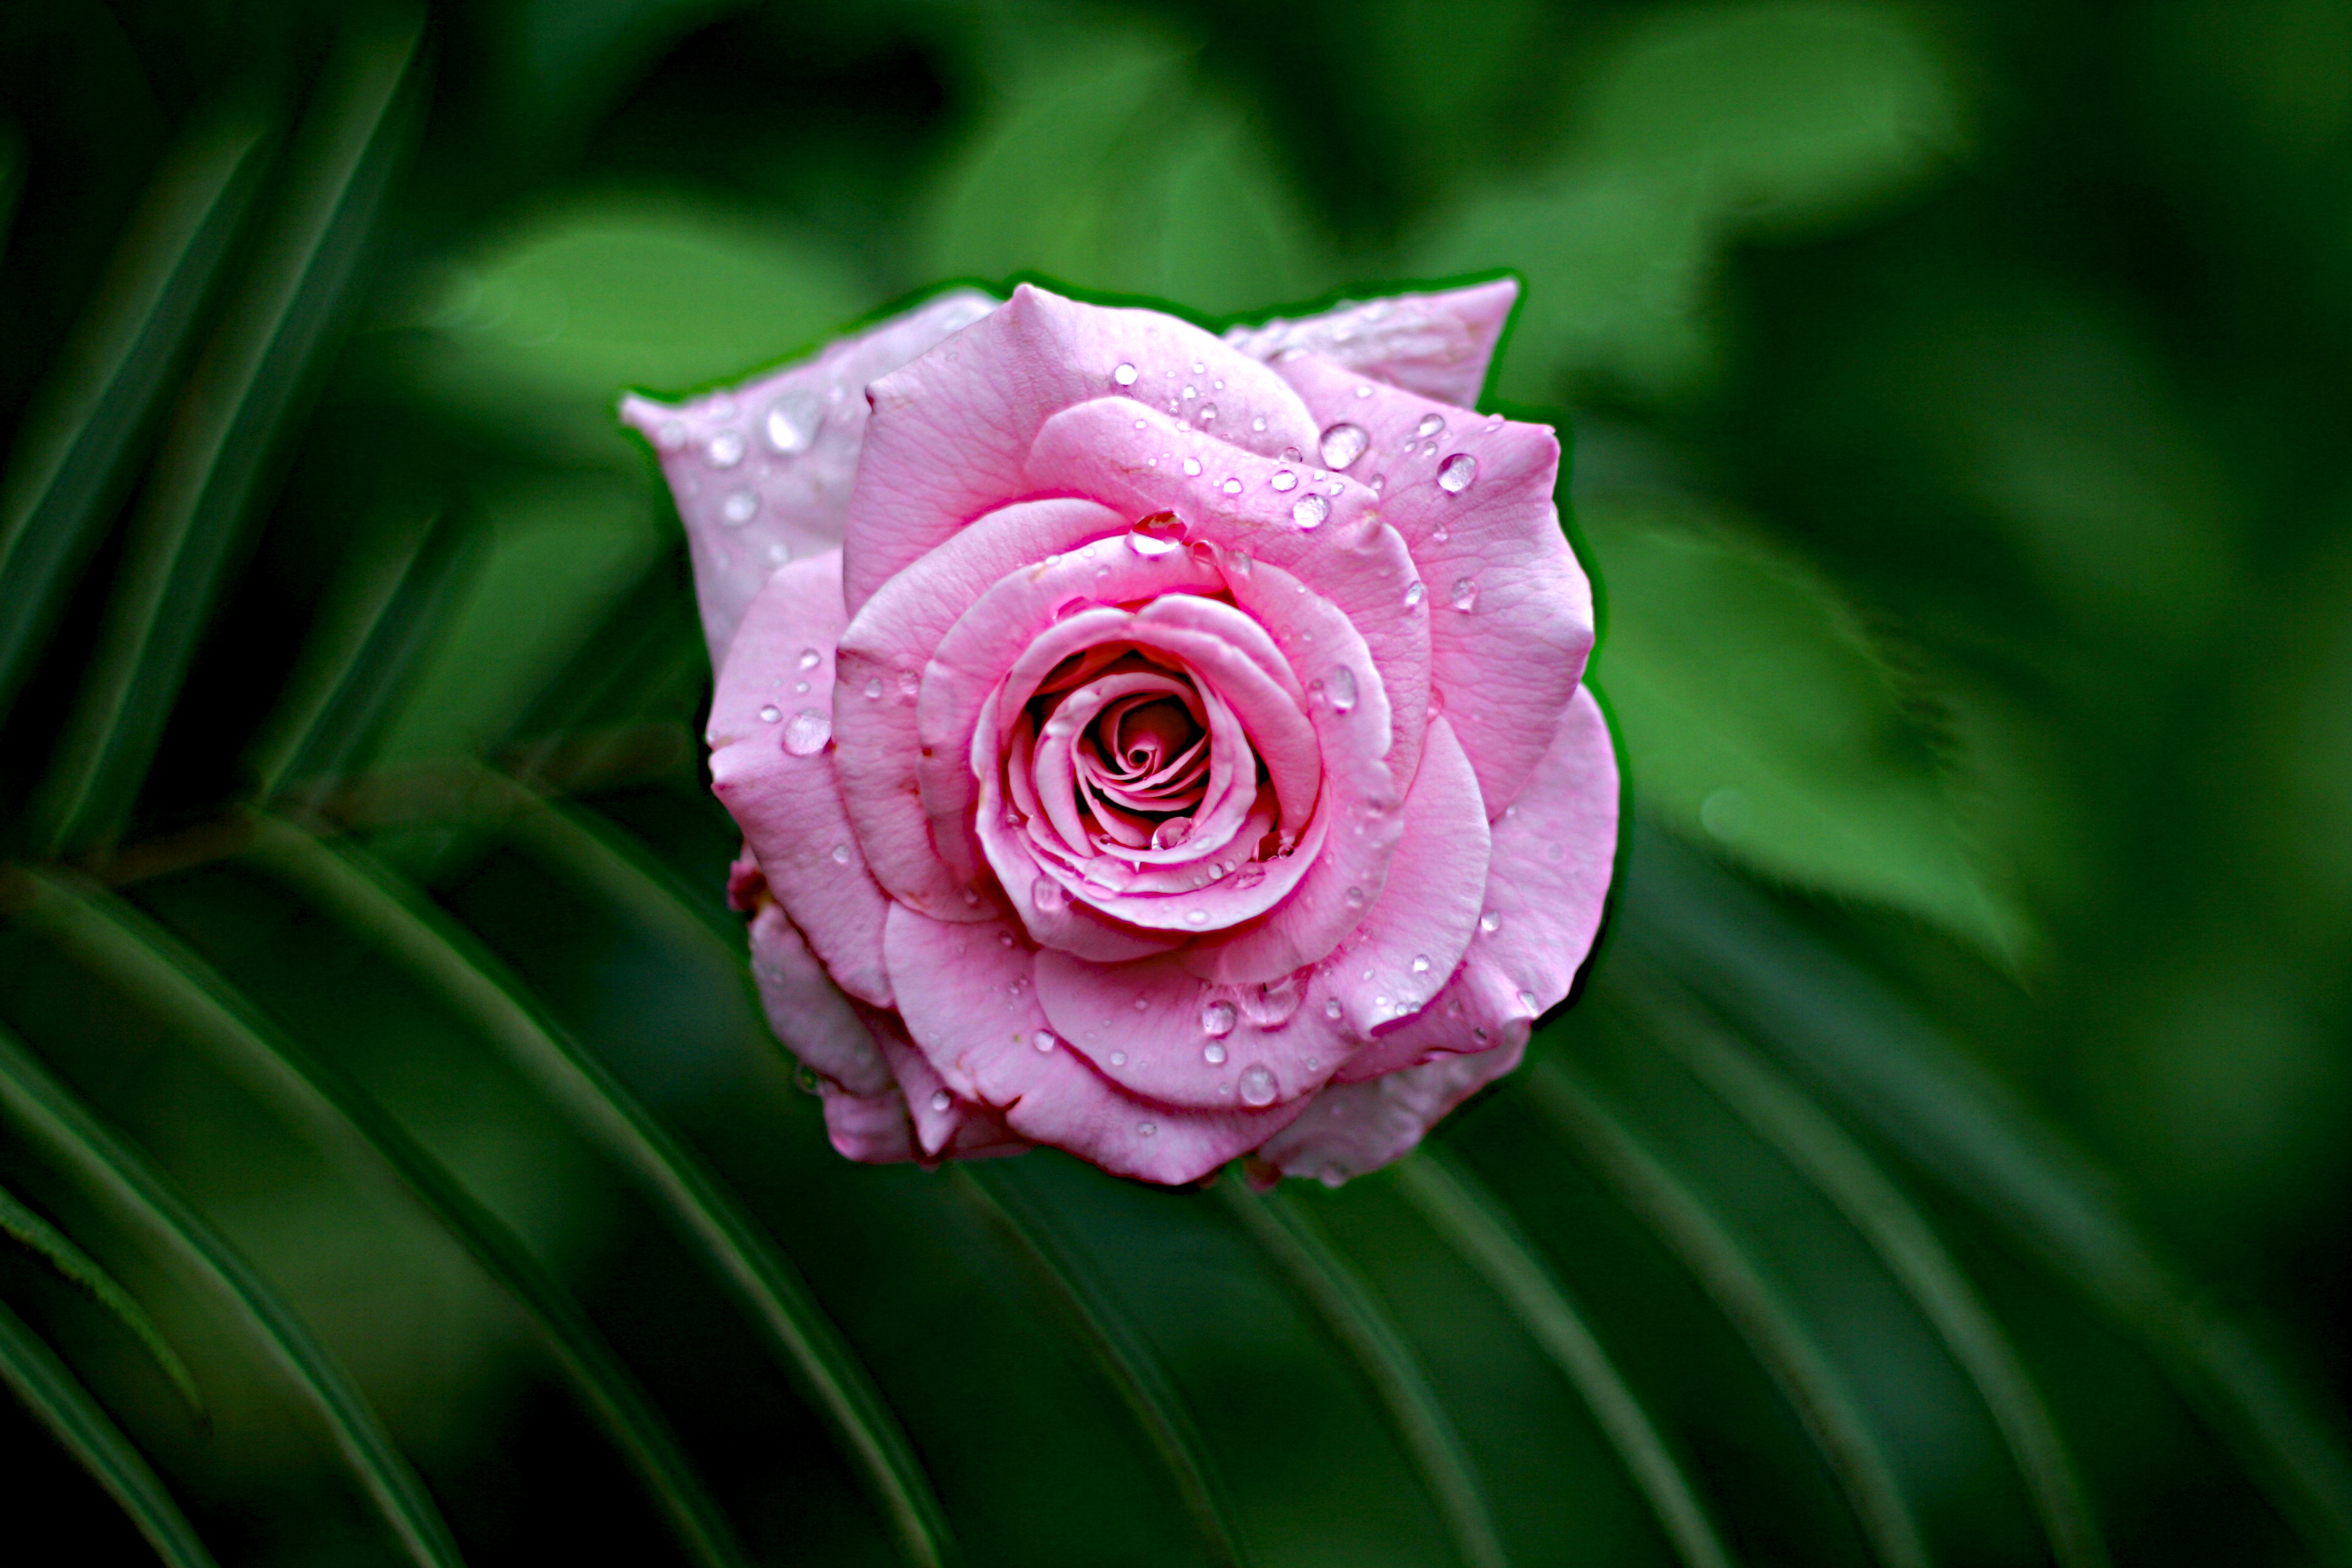 close up, rose flower, wet, drops, flowers, leaves, pink, rose, dew, to dissolve, blossom